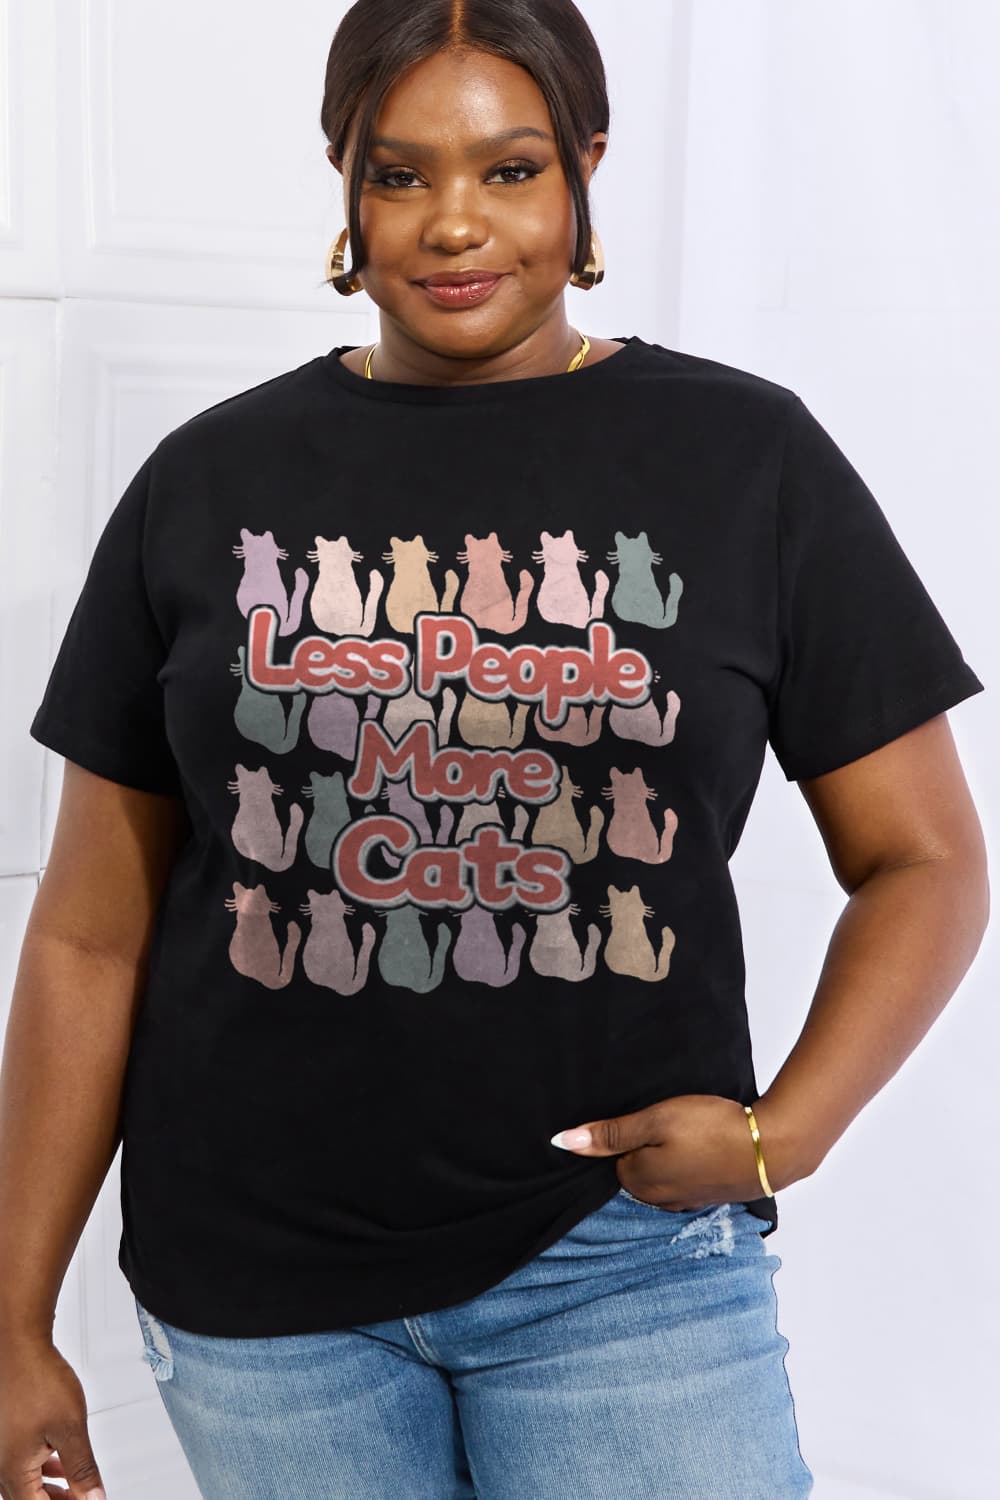 LESS PEOPLE MORE CATS Graphic Cotton Tee - T-Shirts - Shirts & Tops - 23 - 2024